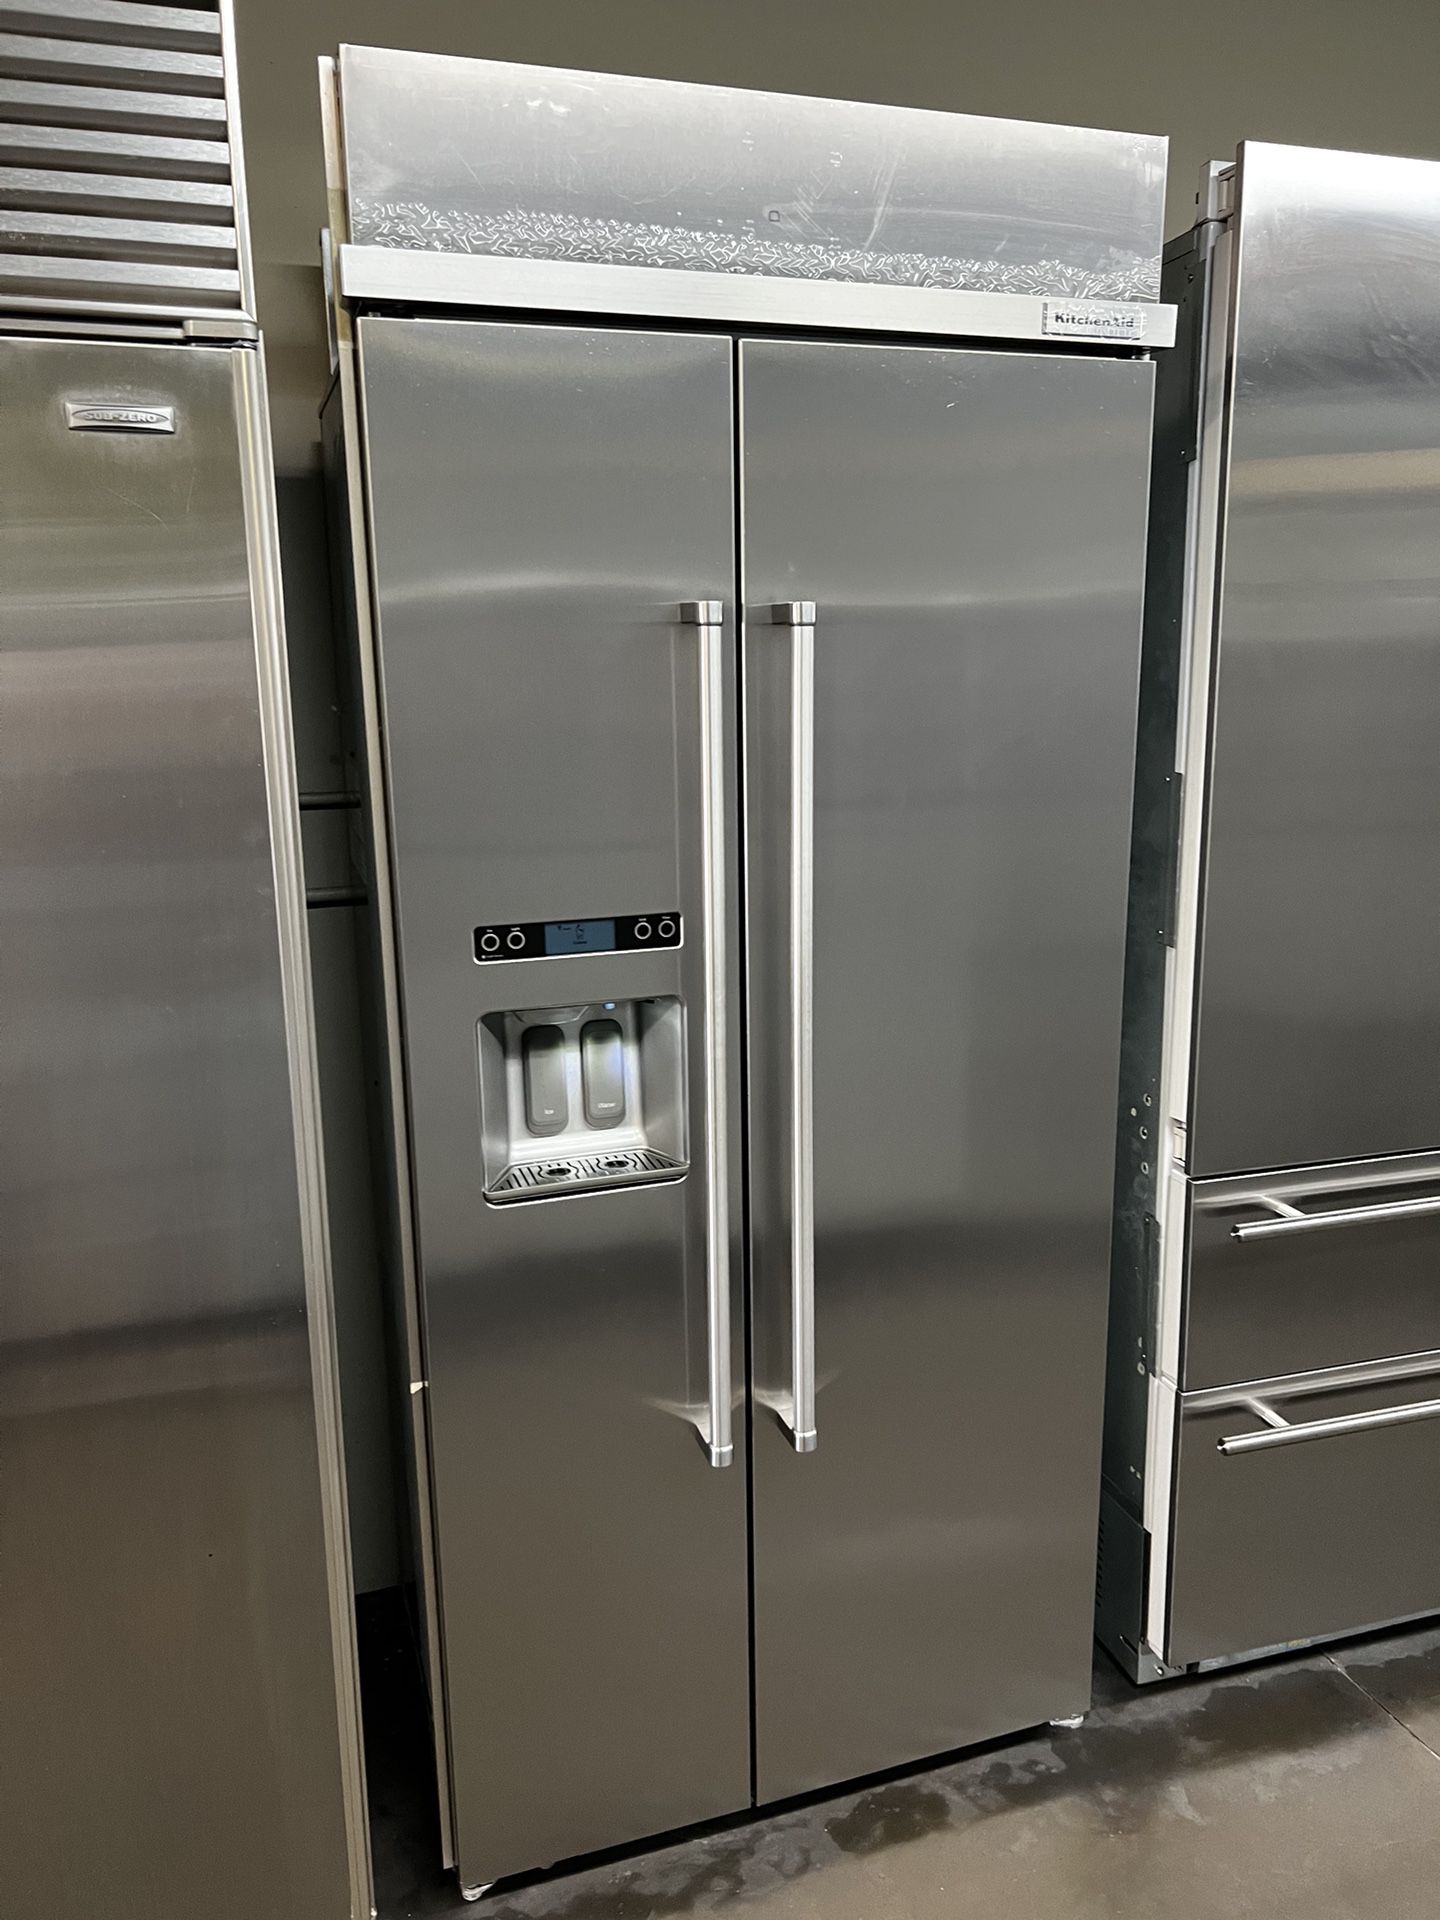 Kitchen Aid 36”Wide Built In Stainless Steel Side By Side Refrigerator 